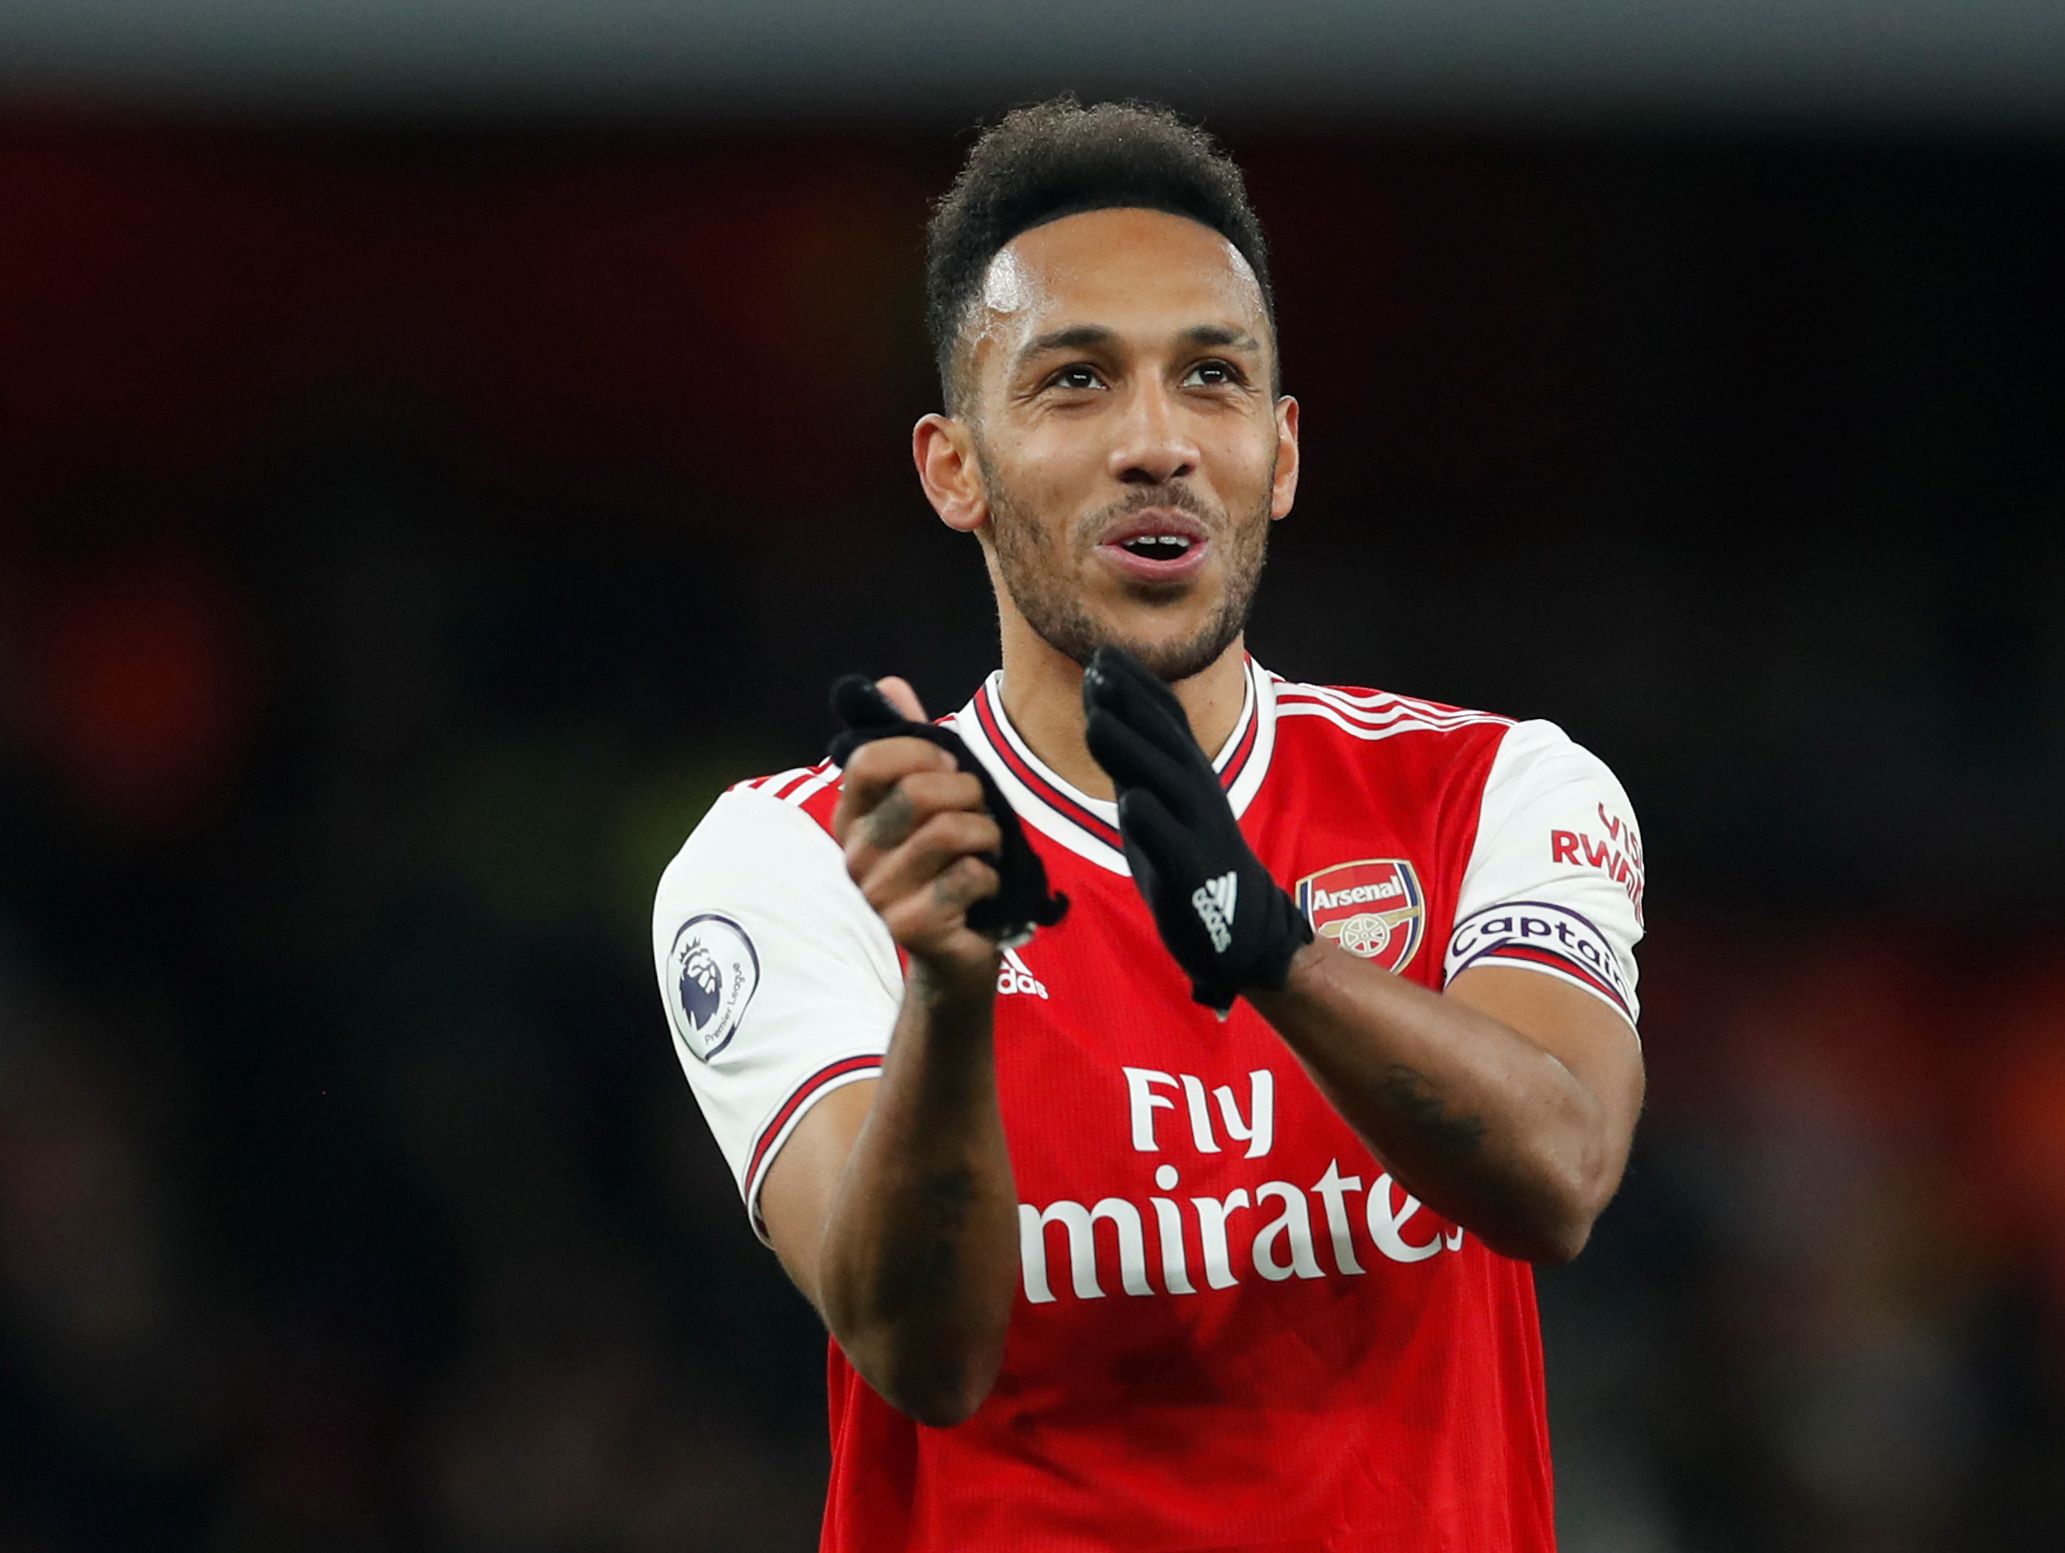 Soccer Football - Premier League - Arsenal v Everton - Emirates Stadium, London, Britain - February 23, 2020   Arsenal's Pierre-Emerick Aubameyang applauds fans after the match   REUTERS/David Klein    EDITORIAL USE ONLY. No use with unauthorized audio, video, data, fixture lists, club/league logos or 